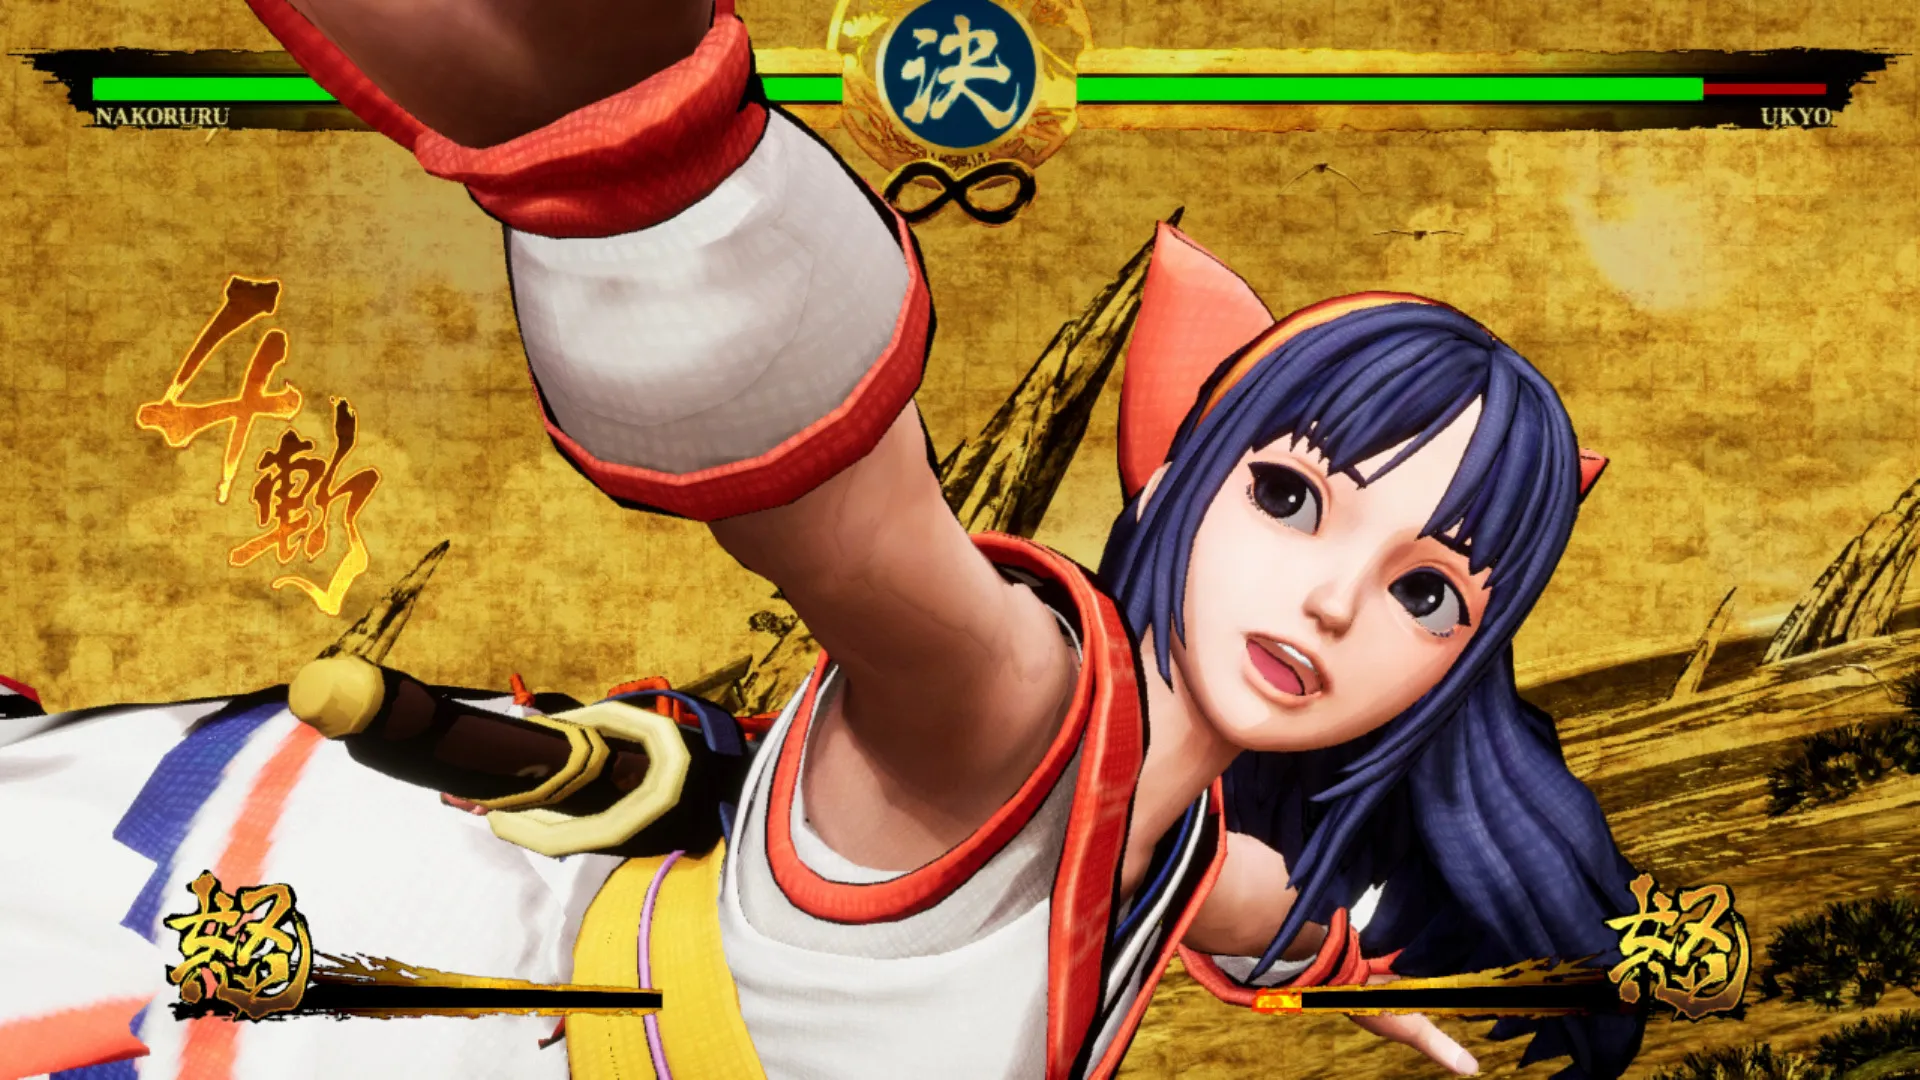 If KOF XV Season 3 is another solo character season, what 5 characters  would you be the most excited to see return? : r/kof